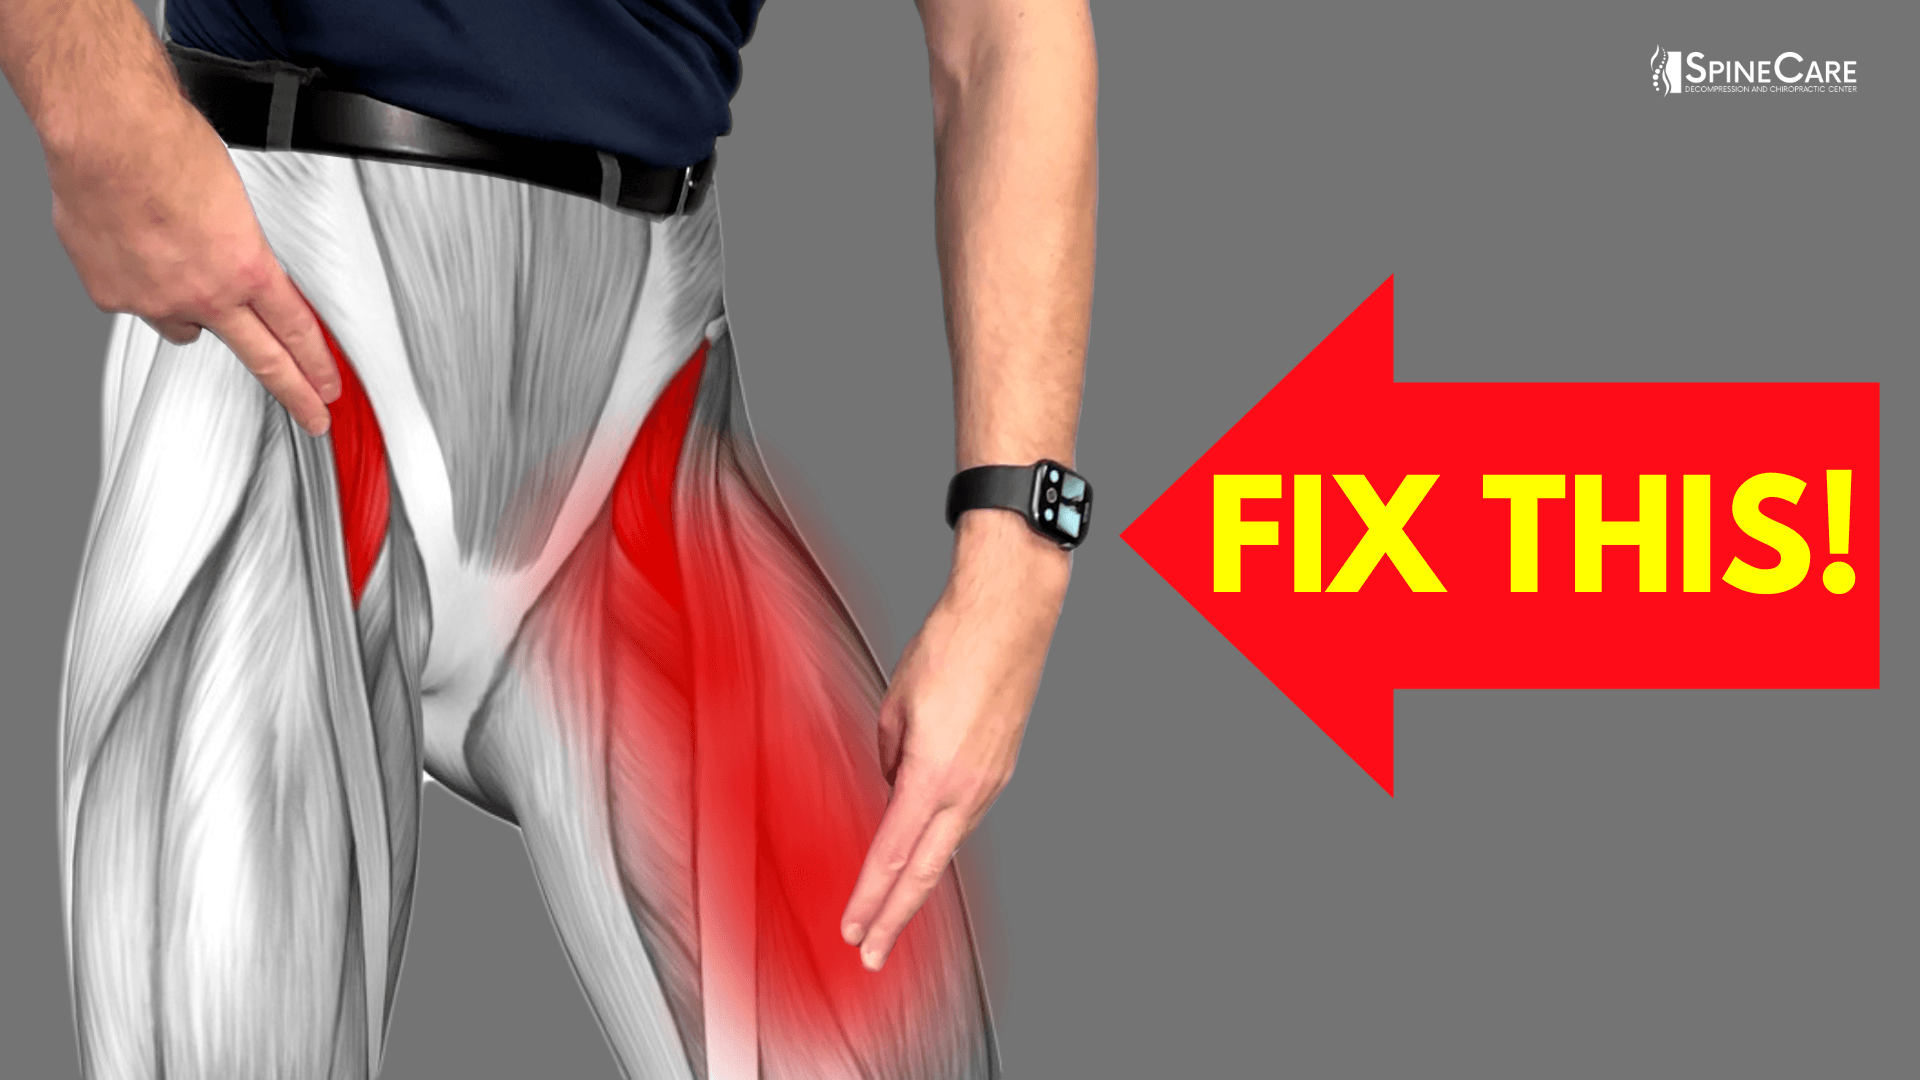 The Hip Pain Muscle (How to Release It for INSTANT RELIEF) 